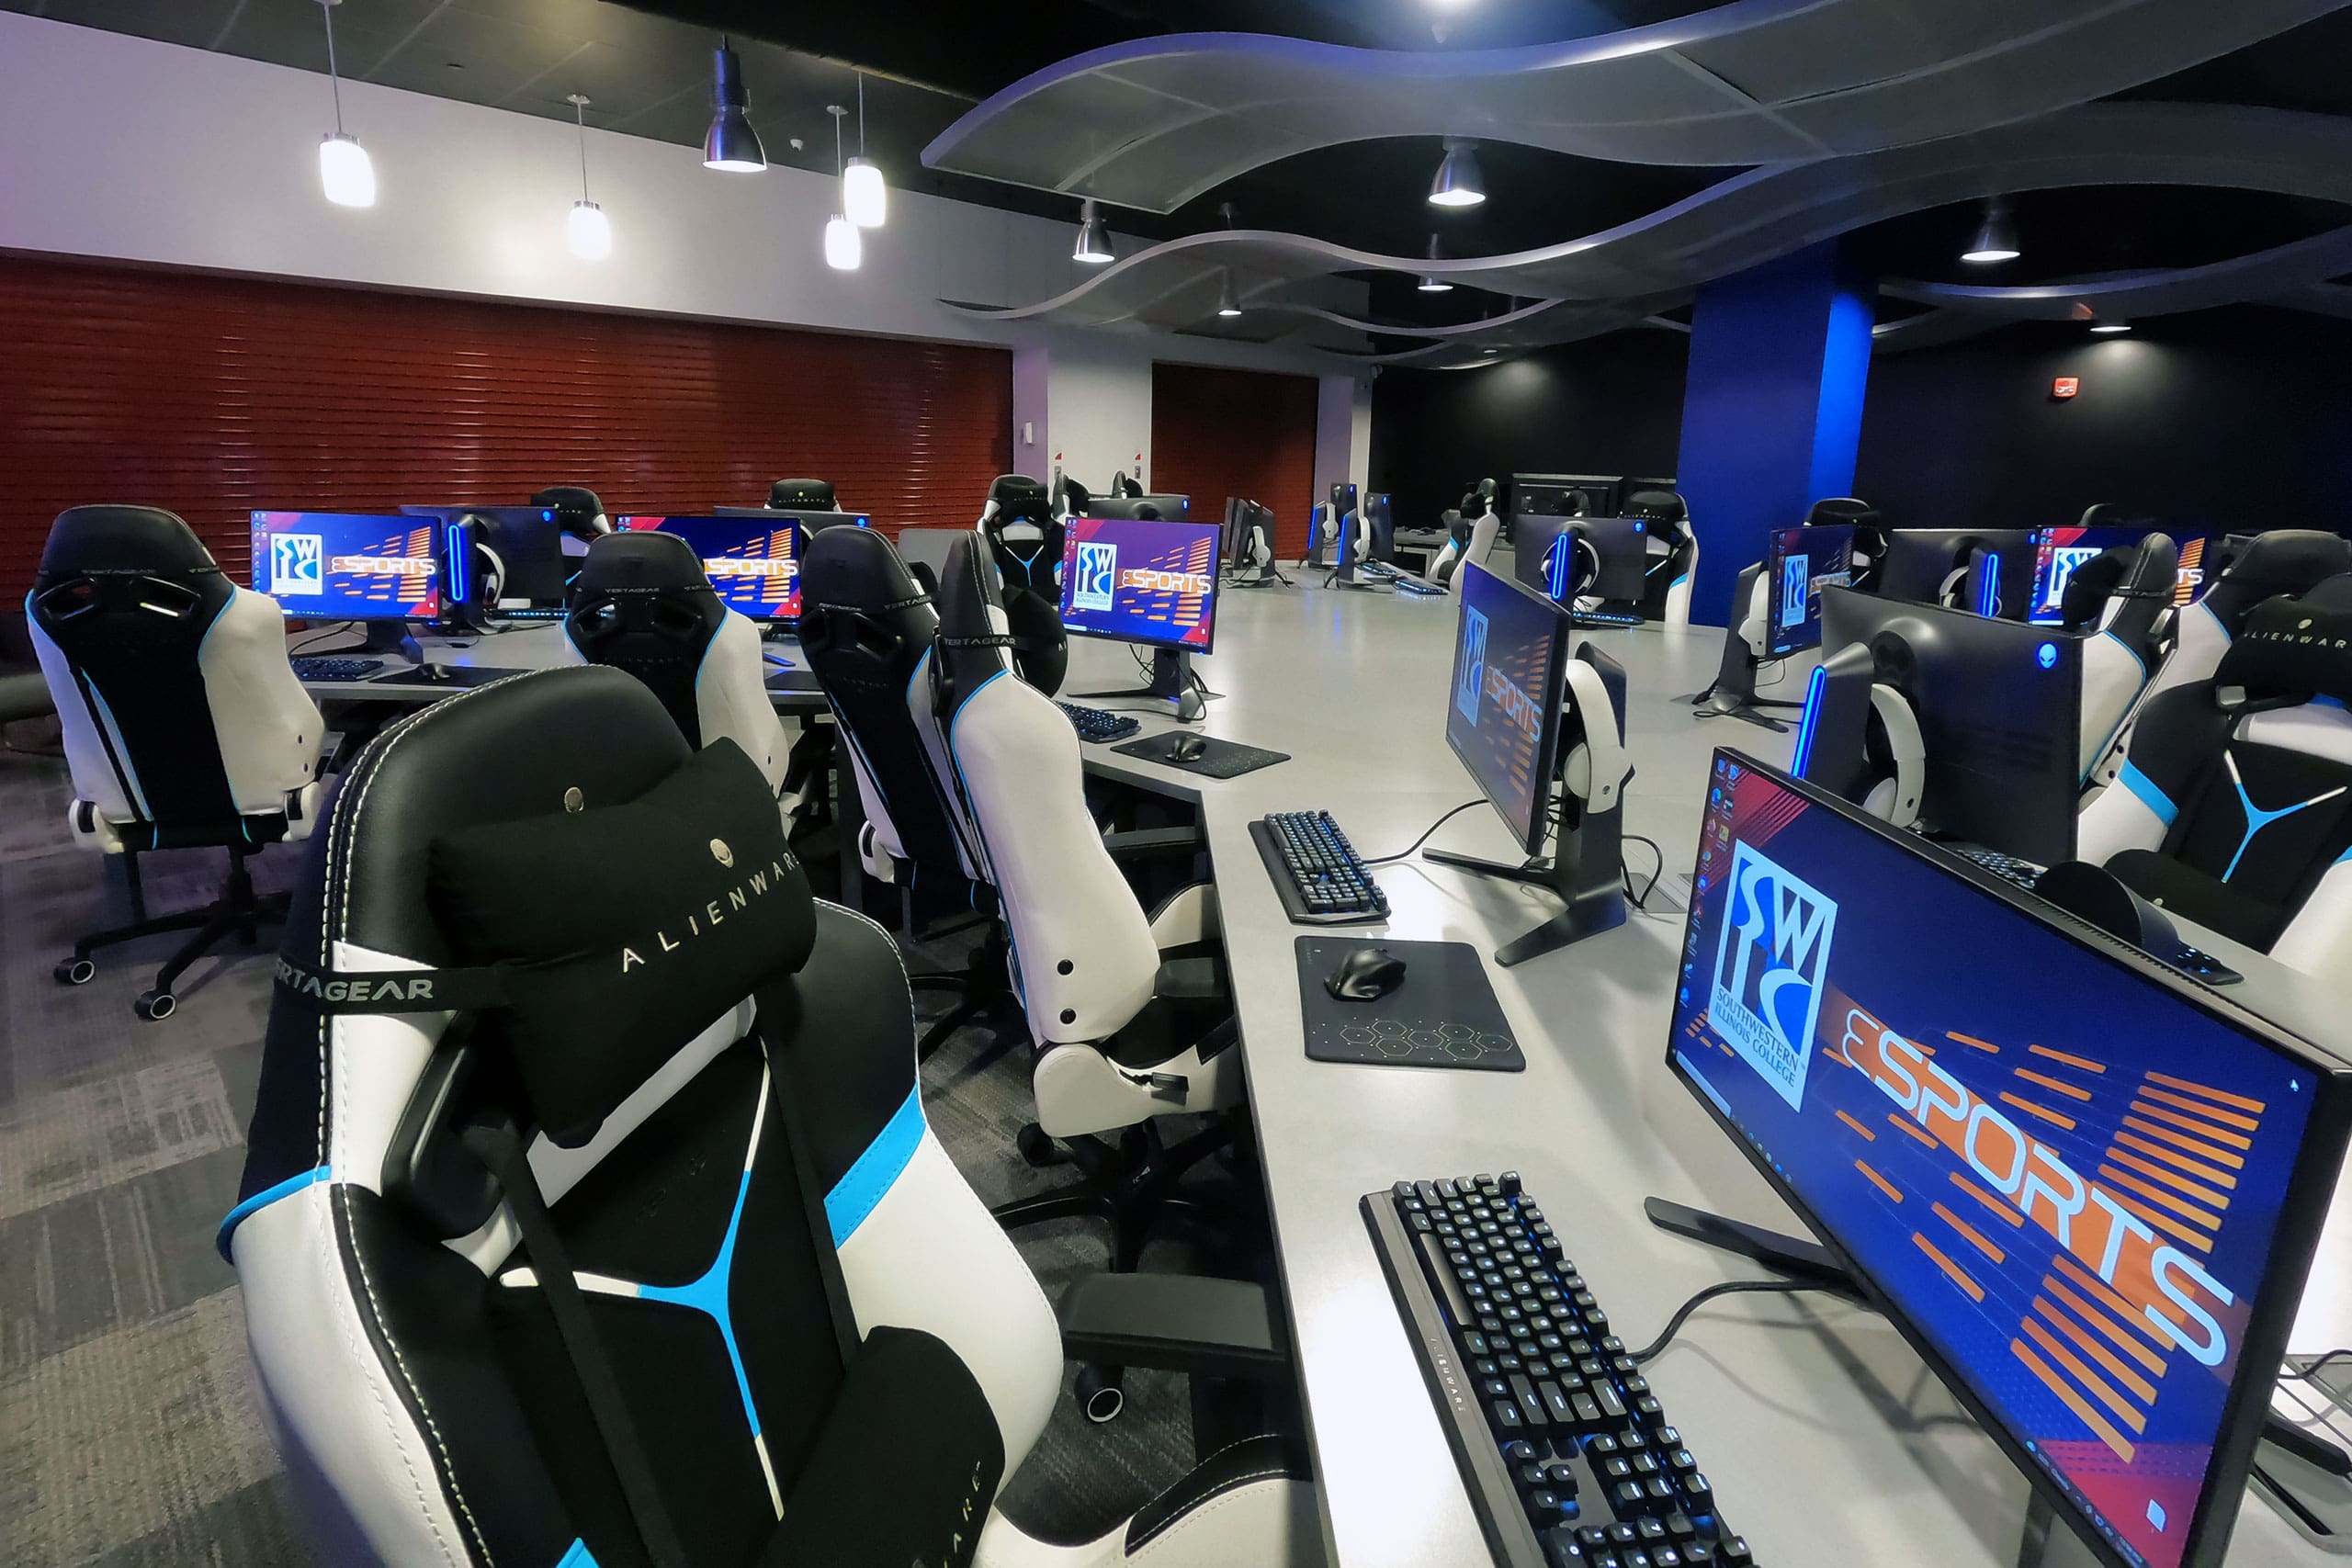 Services - STRYKE eSports and Gaming Center